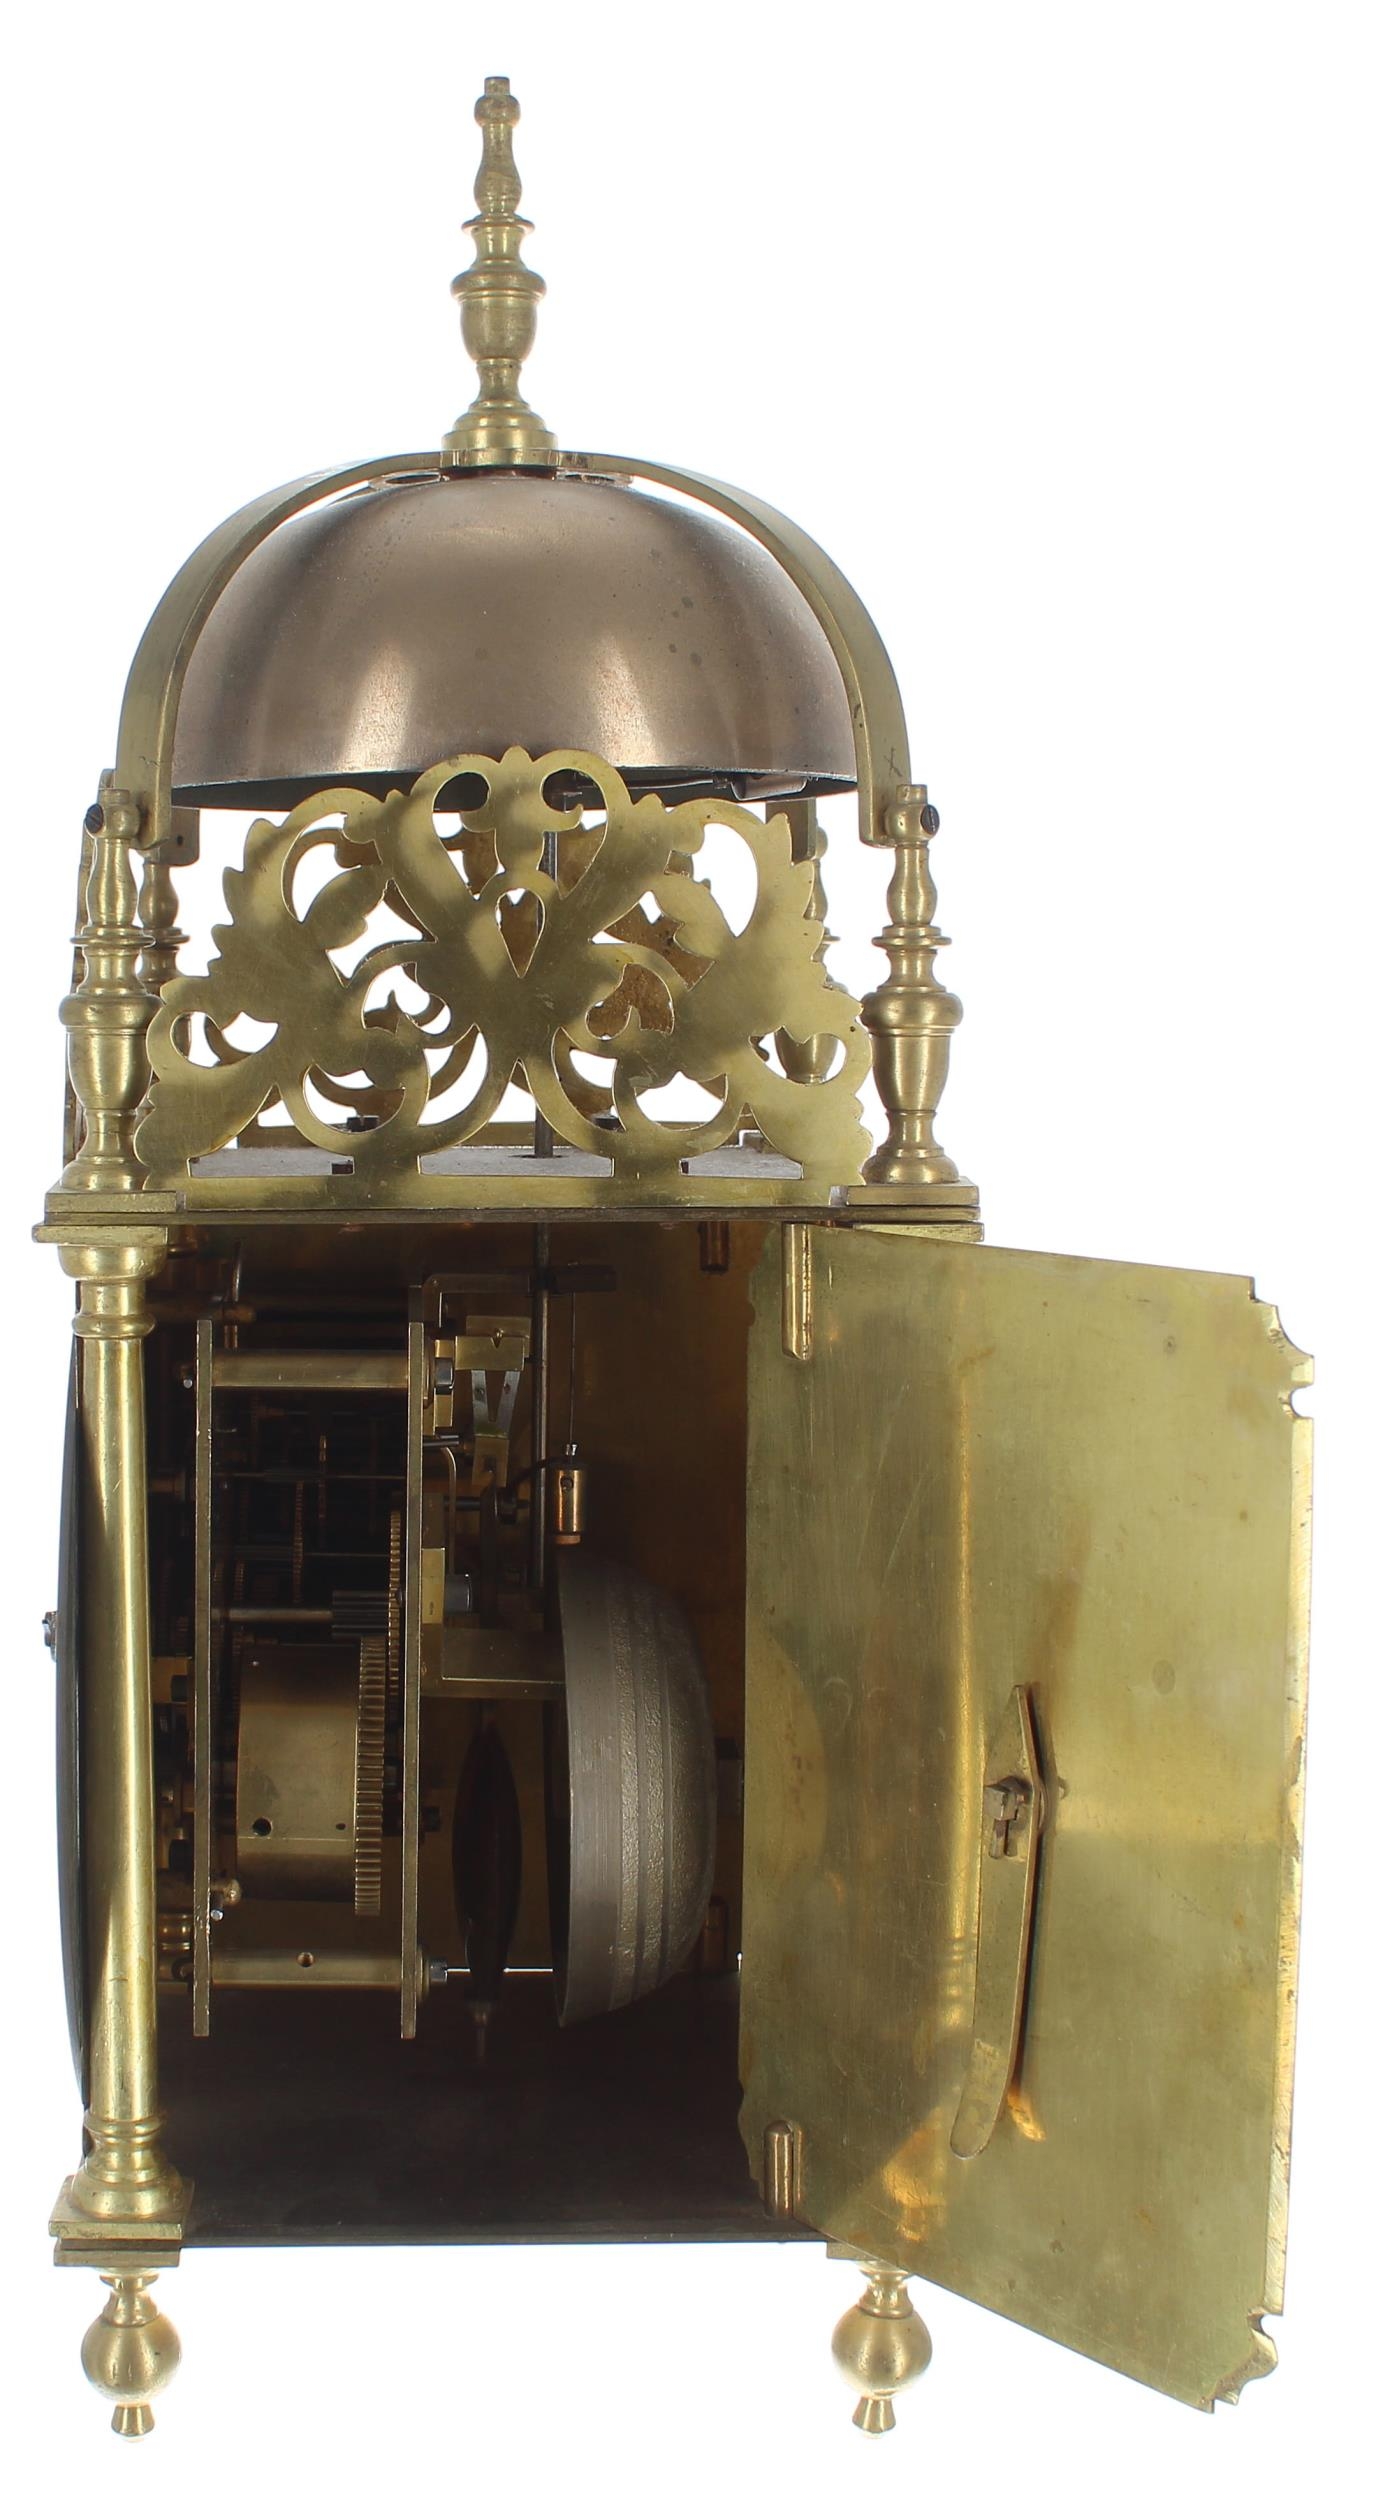 Brass lantern clock, the eight day ting-tang quarter strike on two bells and the movement back plate - Image 3 of 6